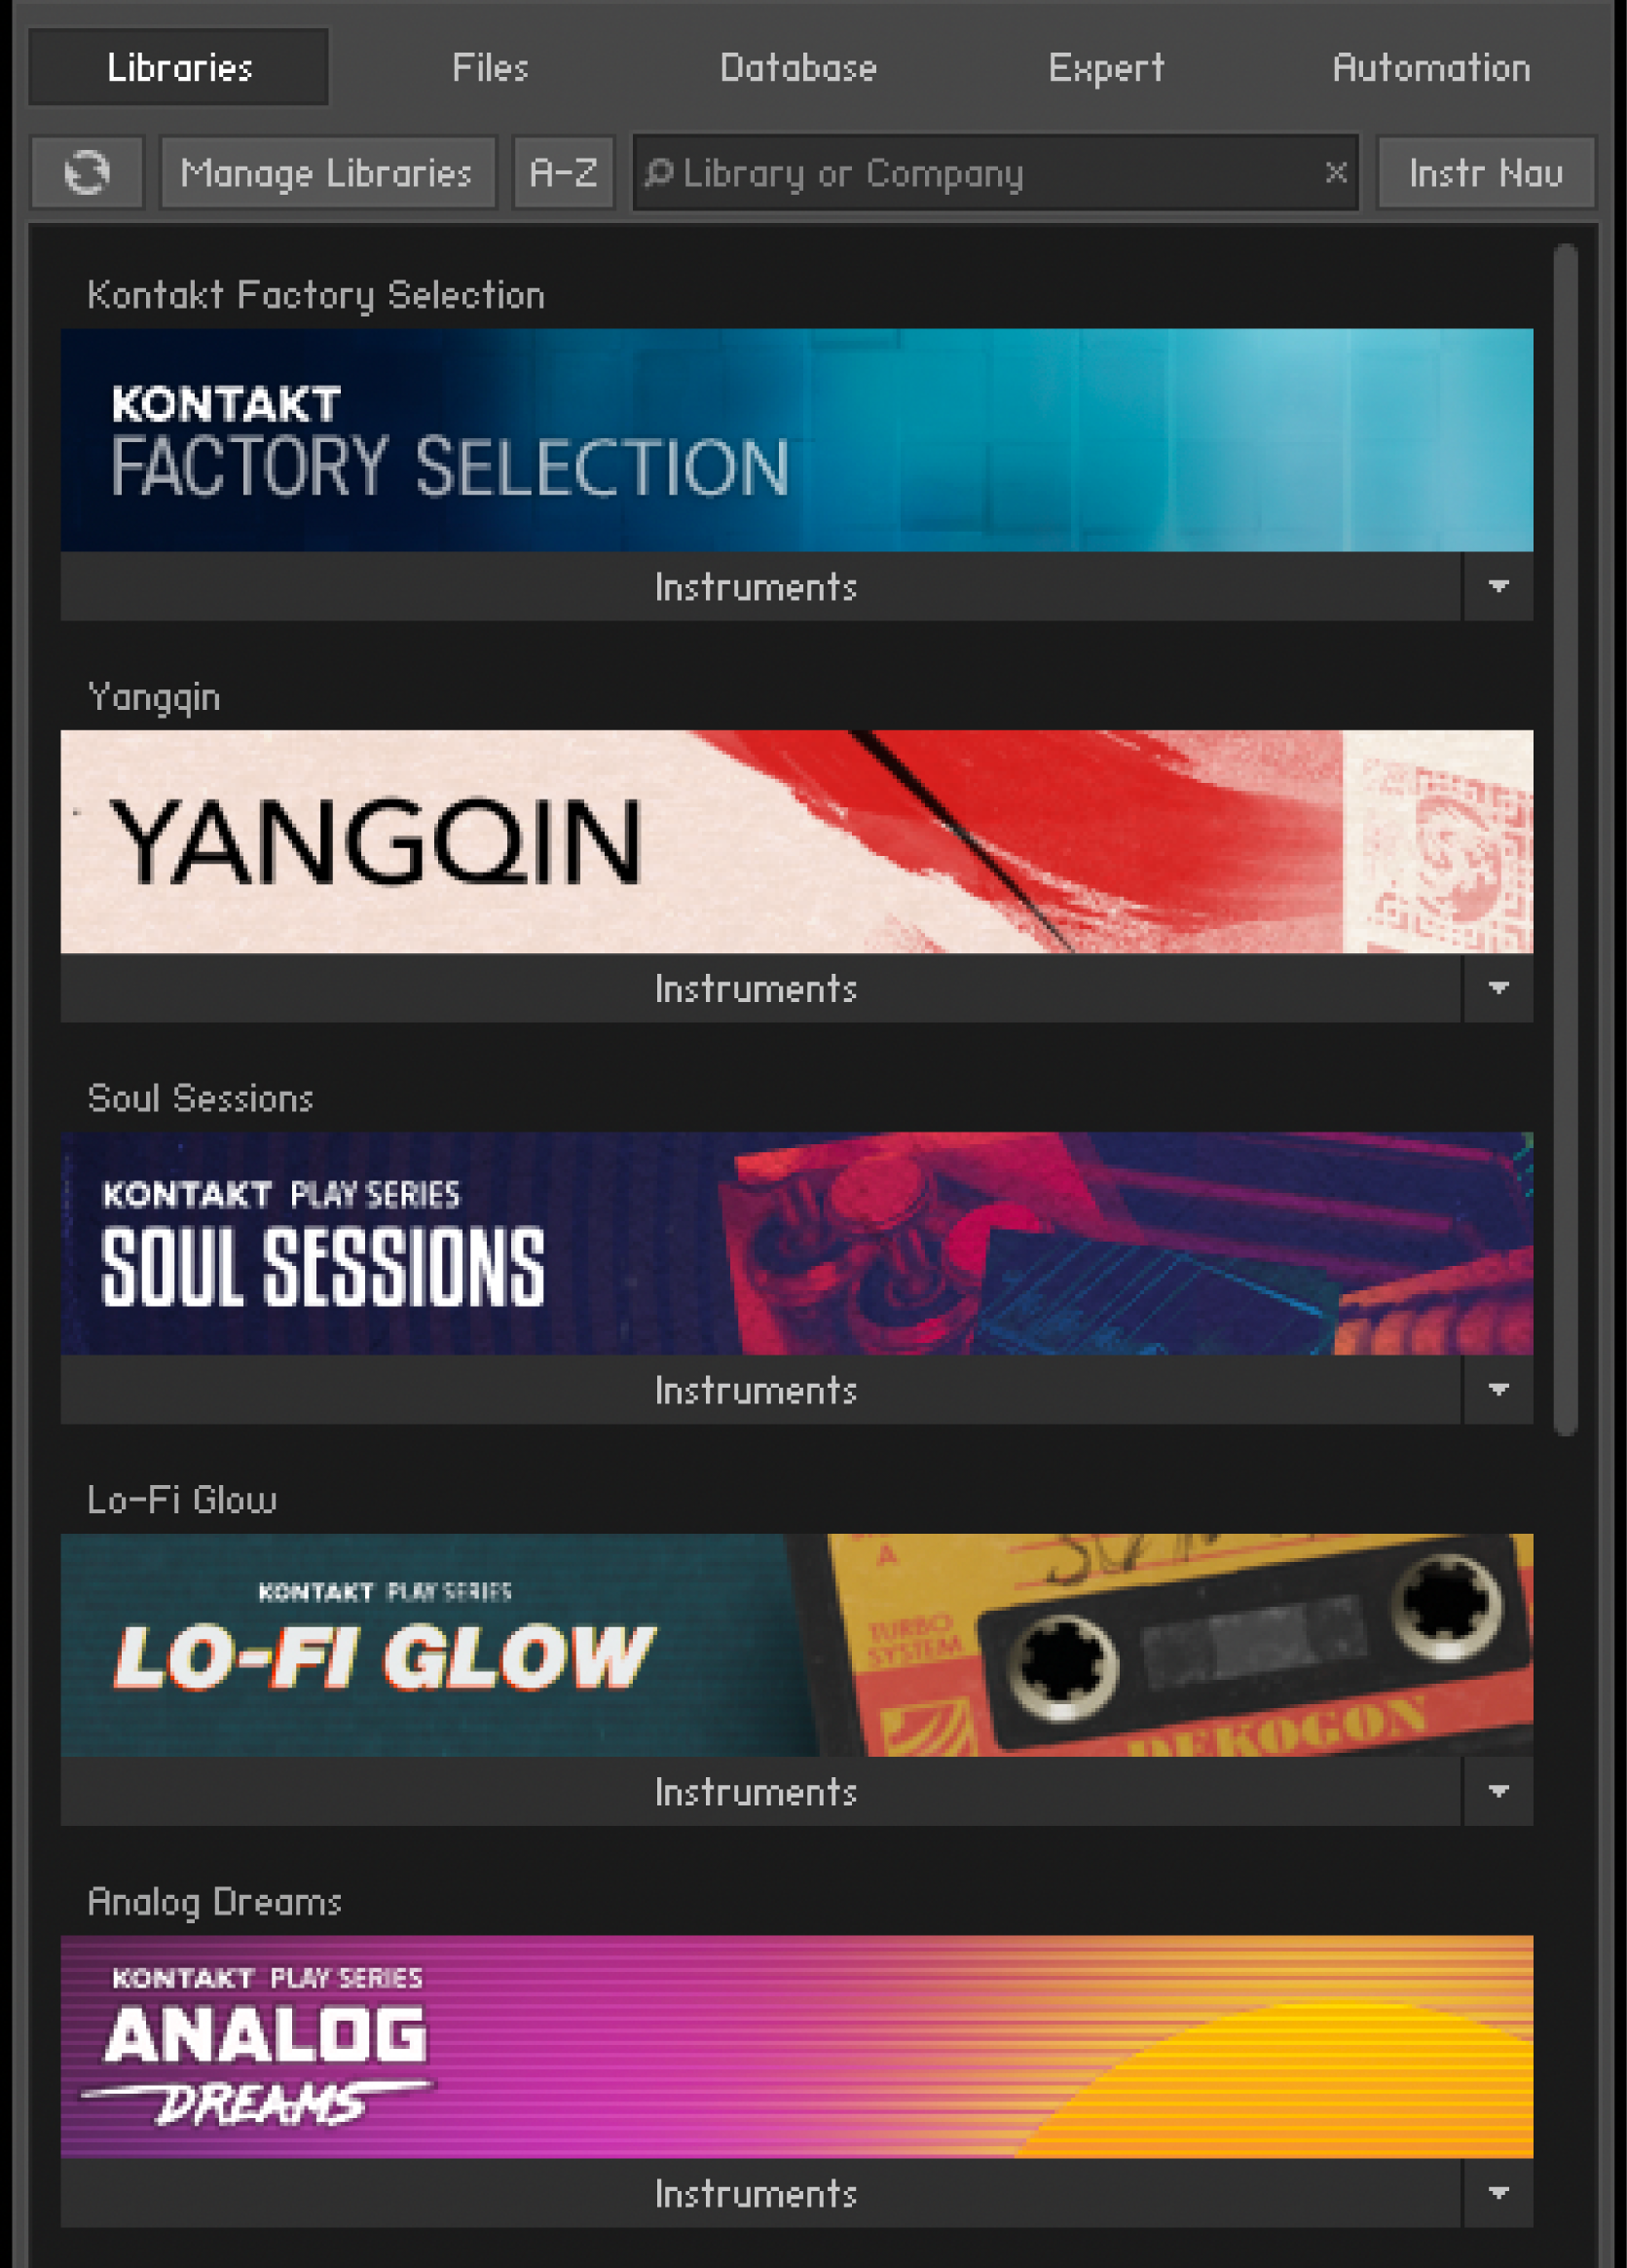 The Kontakt Player browser with instruments Yangqin, Soul Sessions, and the Kontakt factory selection.